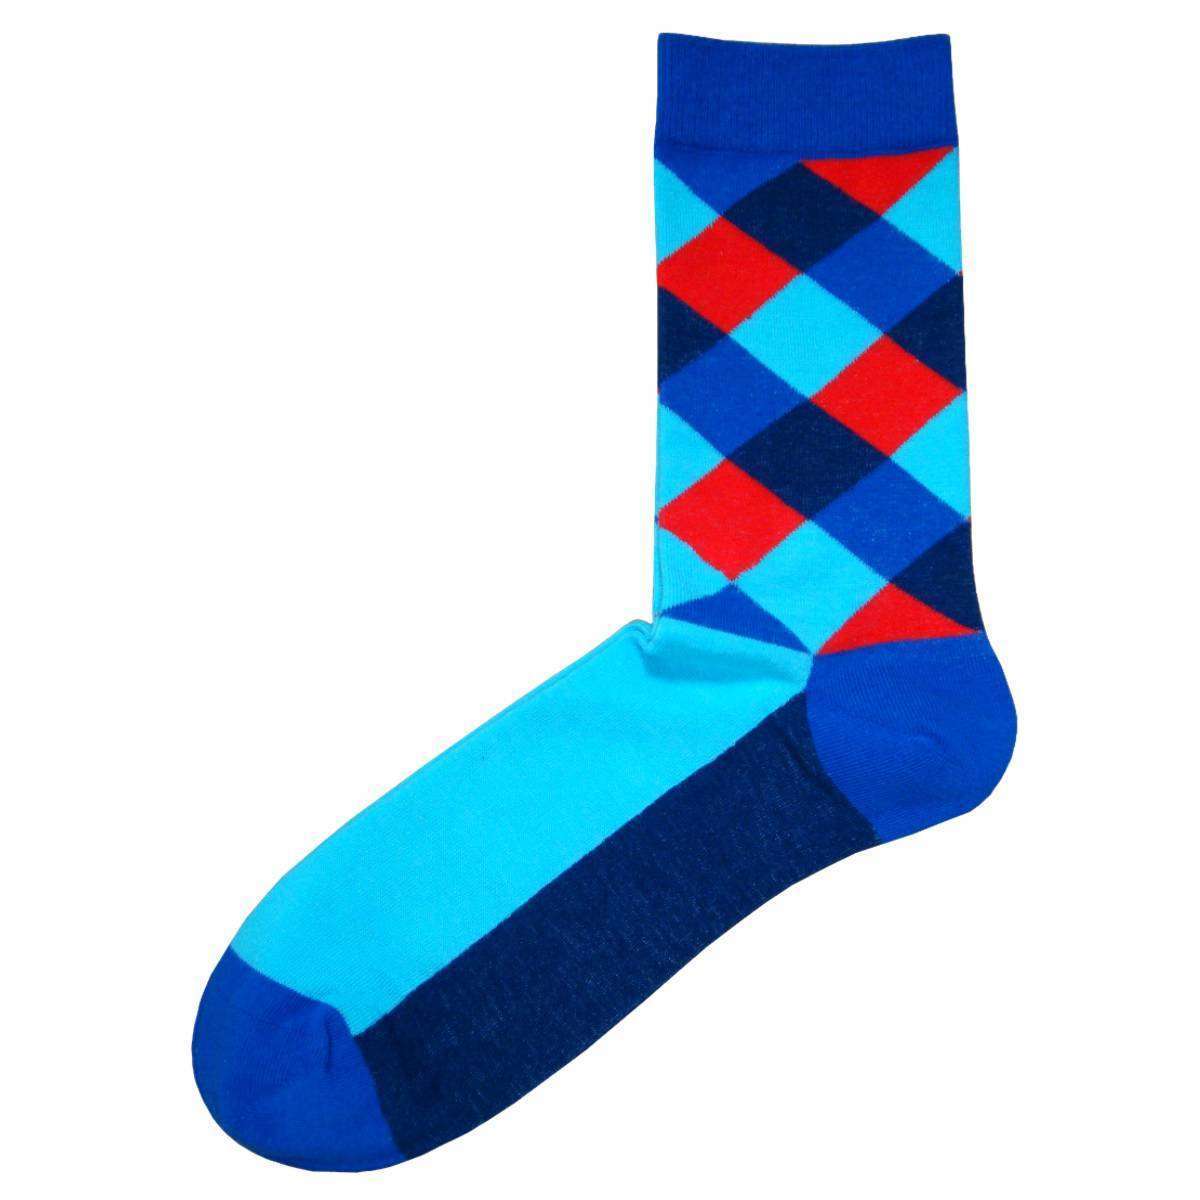 Bassin and Brown Multi Check Socks - Blue/Navy/Red